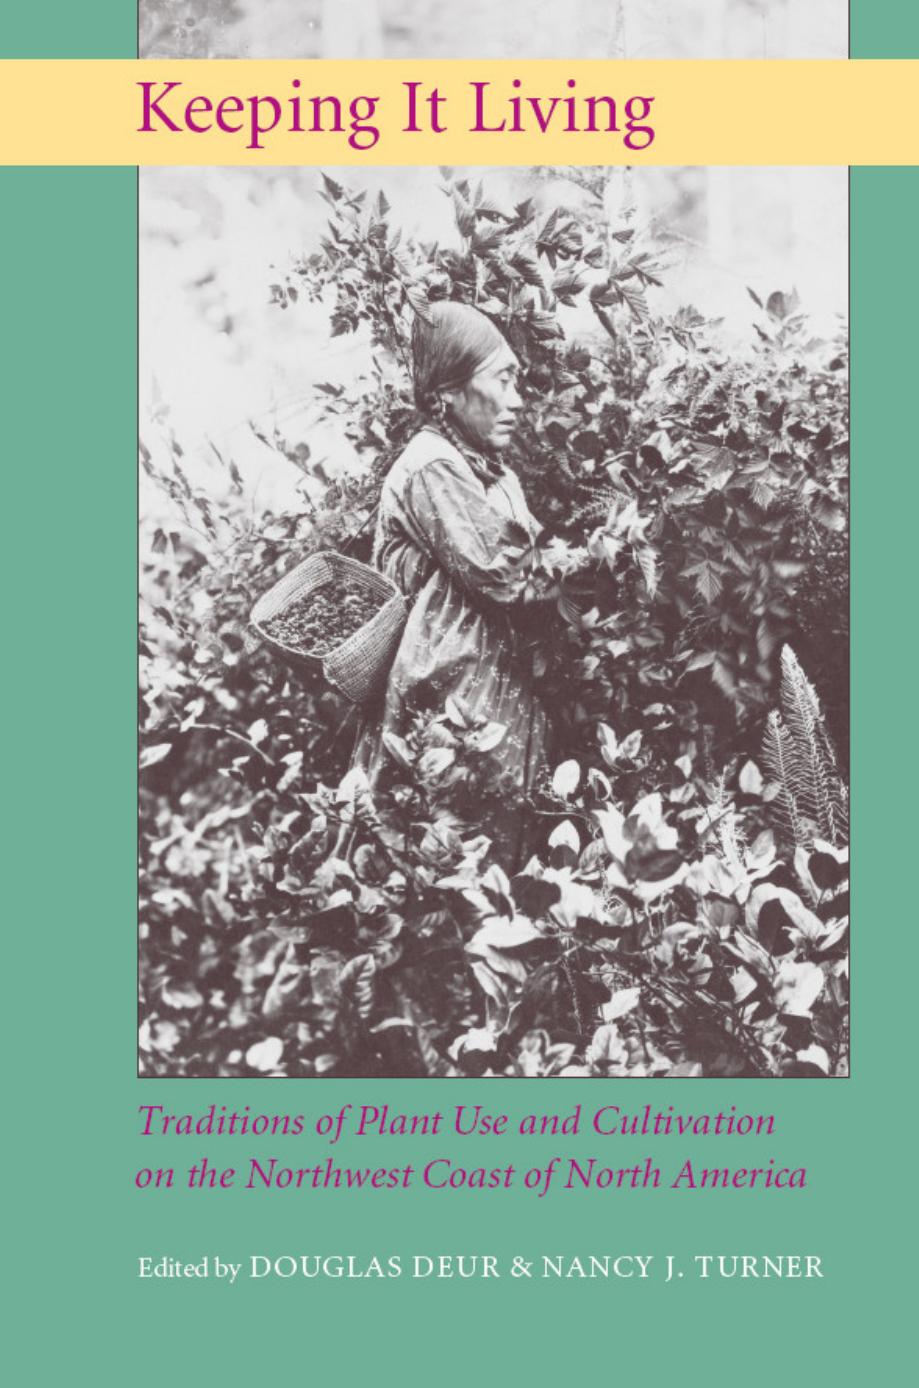 Keeping It Living : Traditions of Plant Use and Cultivation on the Northwest Coast of North America by Douglas Deur and Nancy J. Turner (Editors)